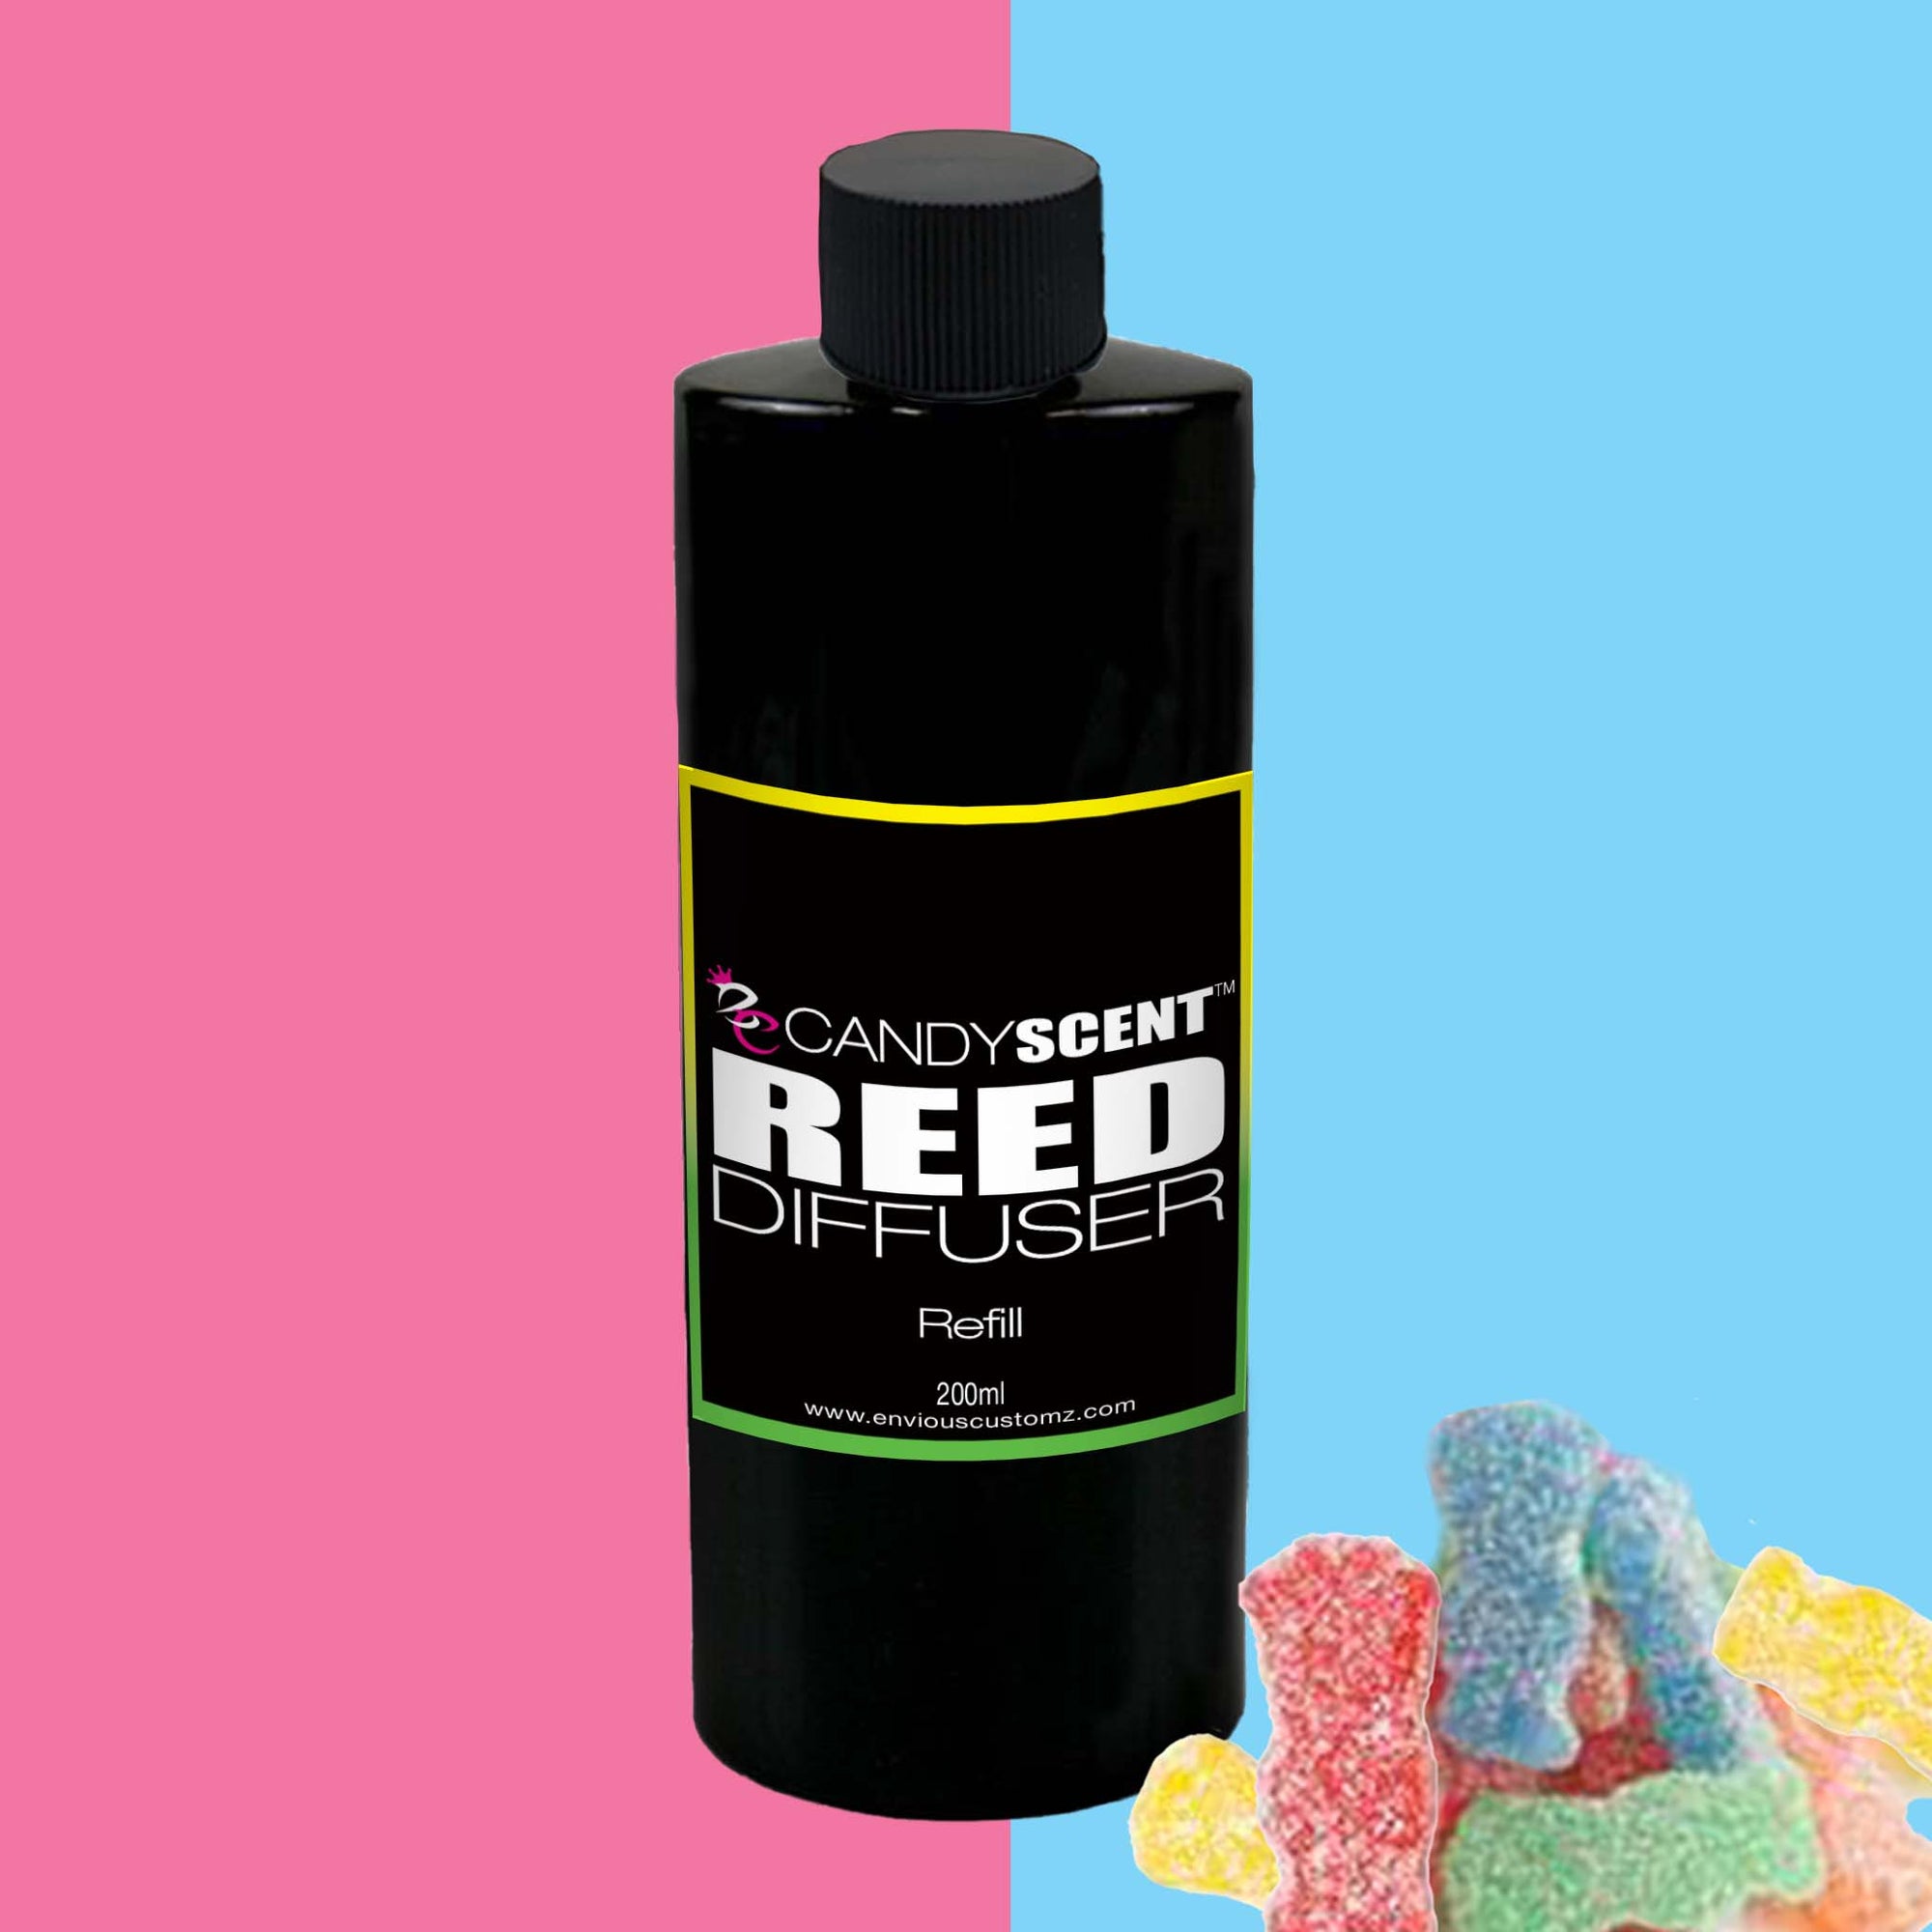 SOUR PATCH Reed Diffuser Refill